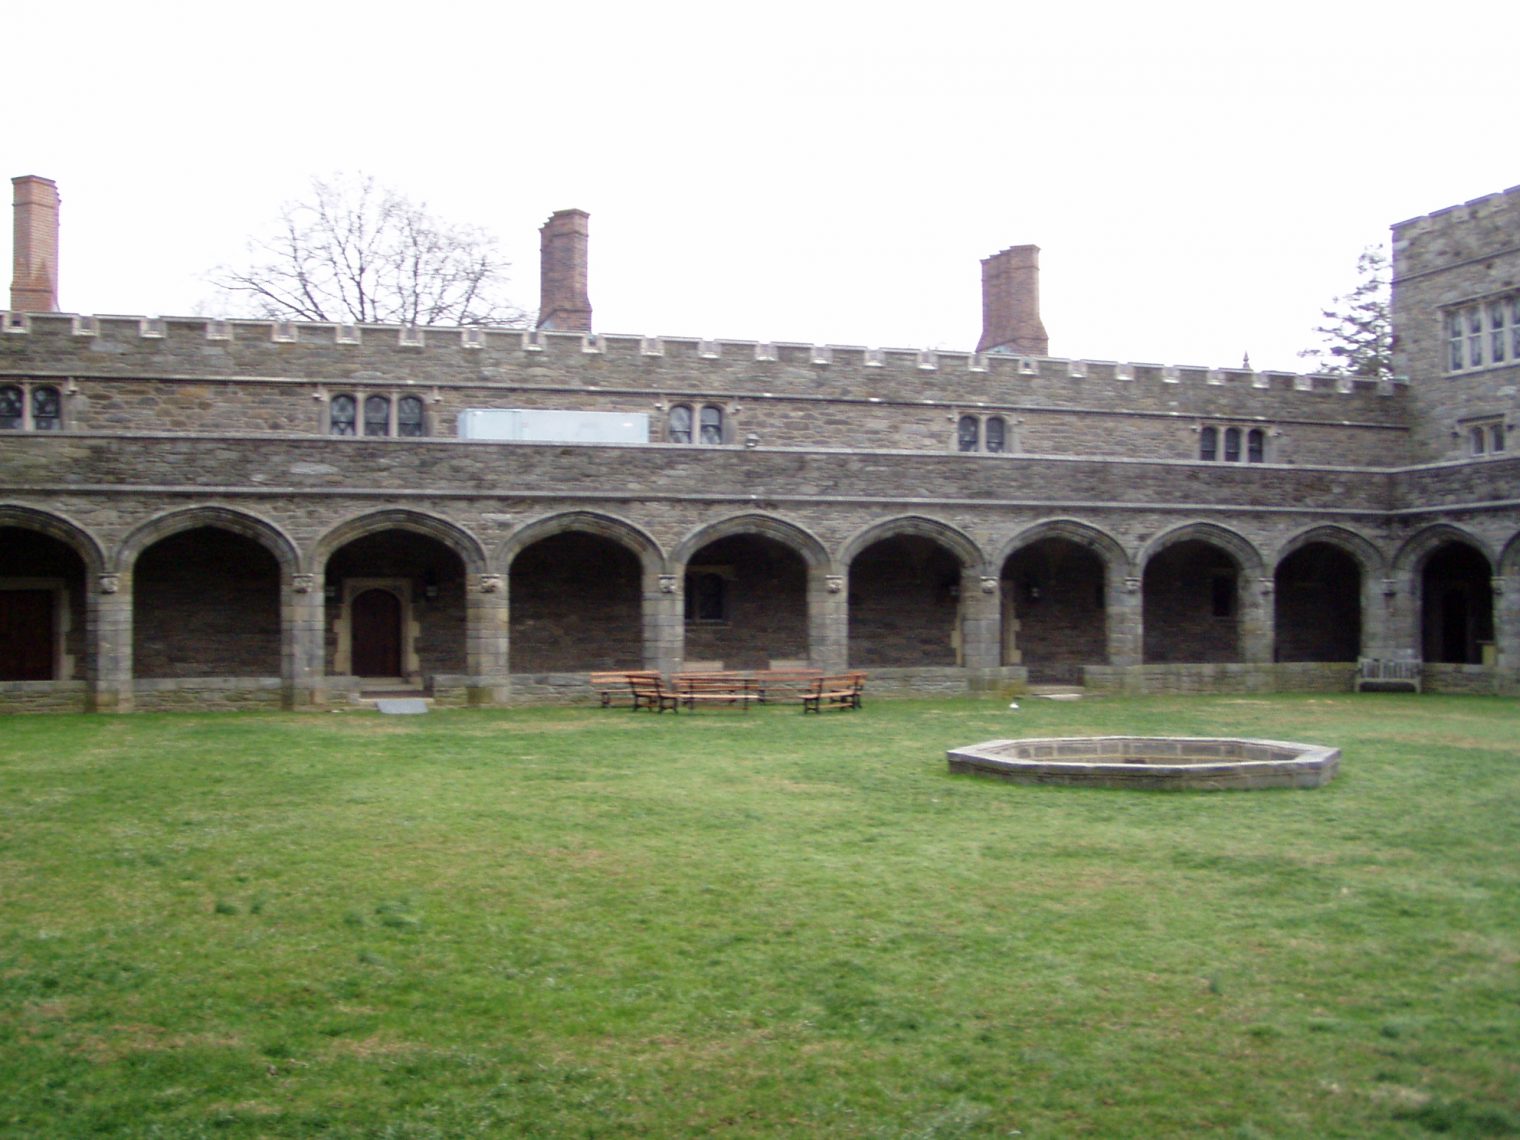 Noether's remains were placed under the walkway surrounding the cloisters of Bryn Mawr's M. Carey Thomas Library (photo: Jeffrey M. Vinocur, Creative Commons, WikiMedia)